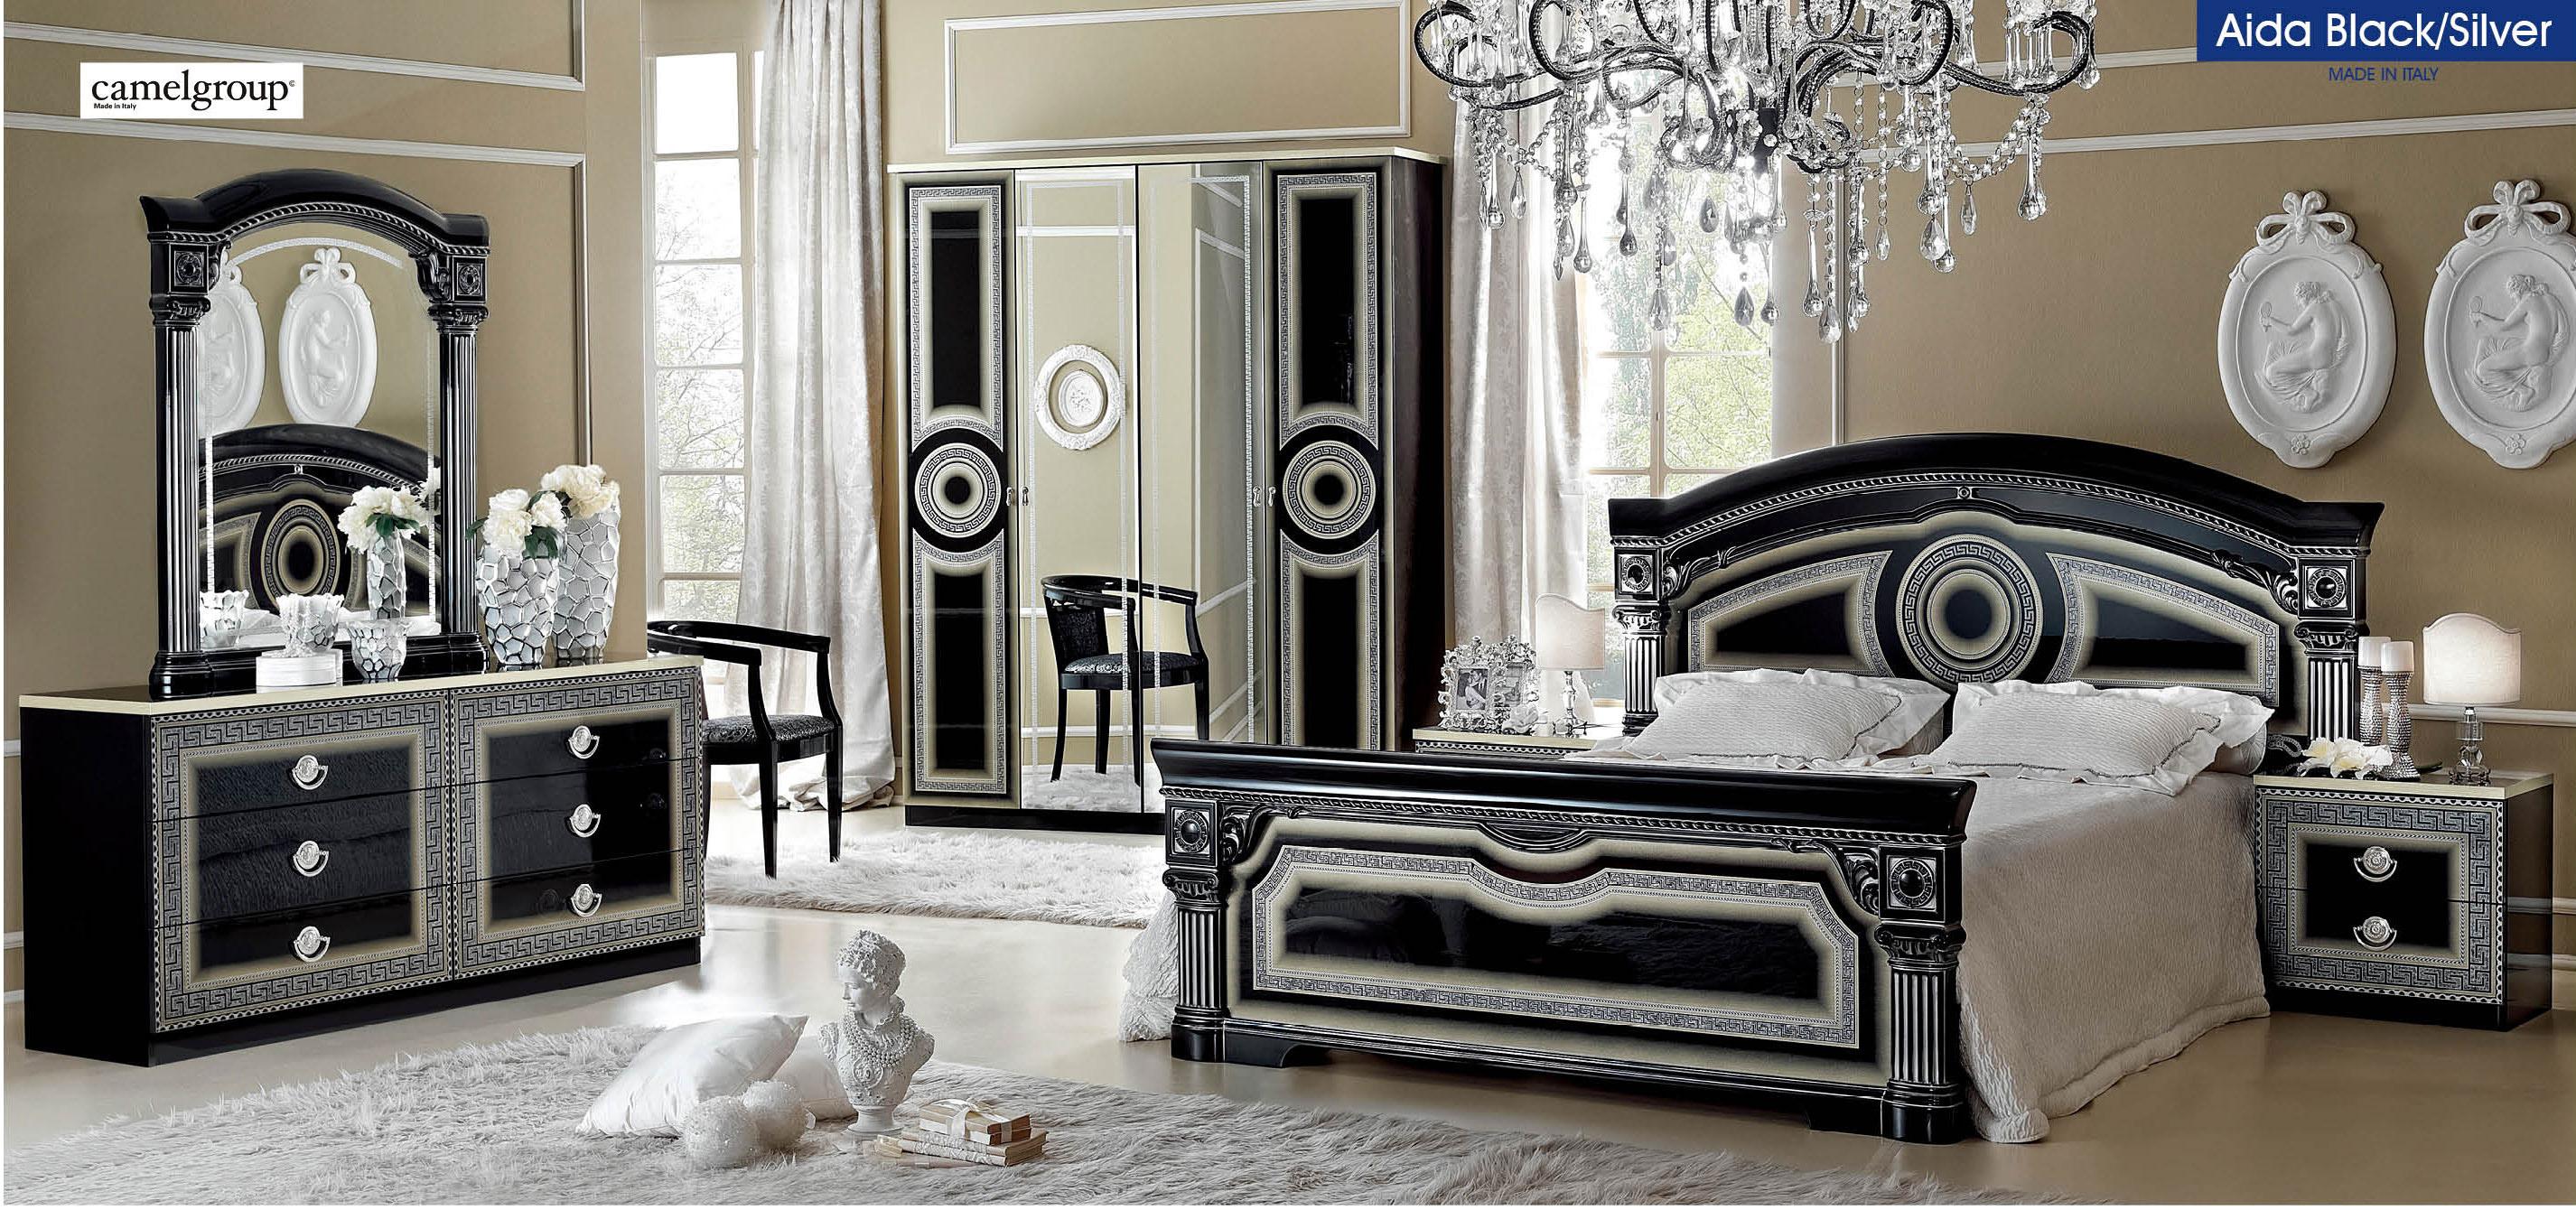 

    
ESF Aida Black Silver Lacquer King Bedroom Set 5Ps Made in Italy
